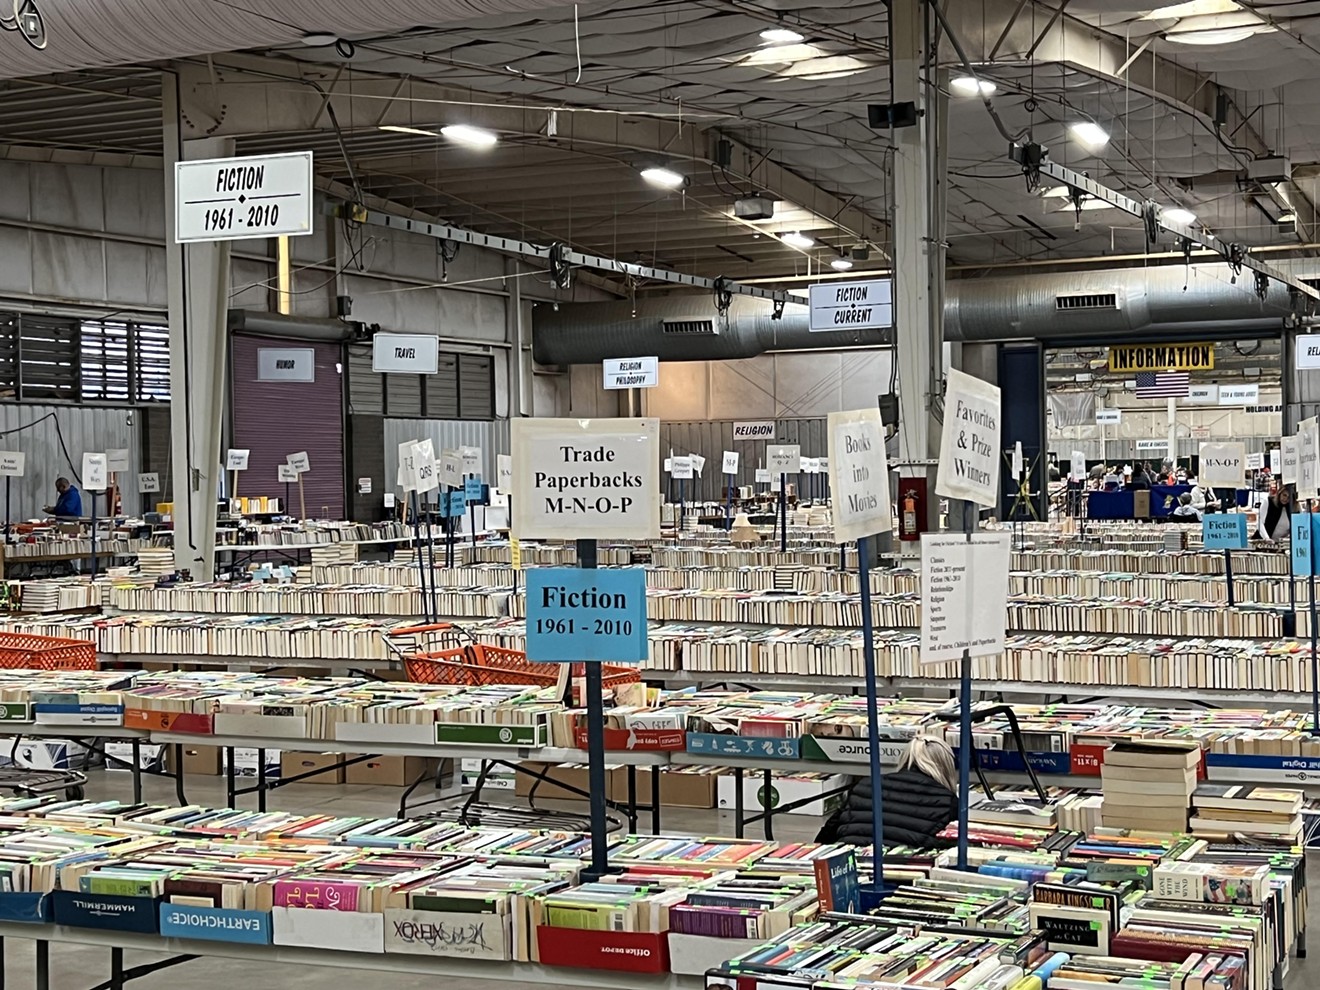 The VNSA Used Book Sale is back this weekend.